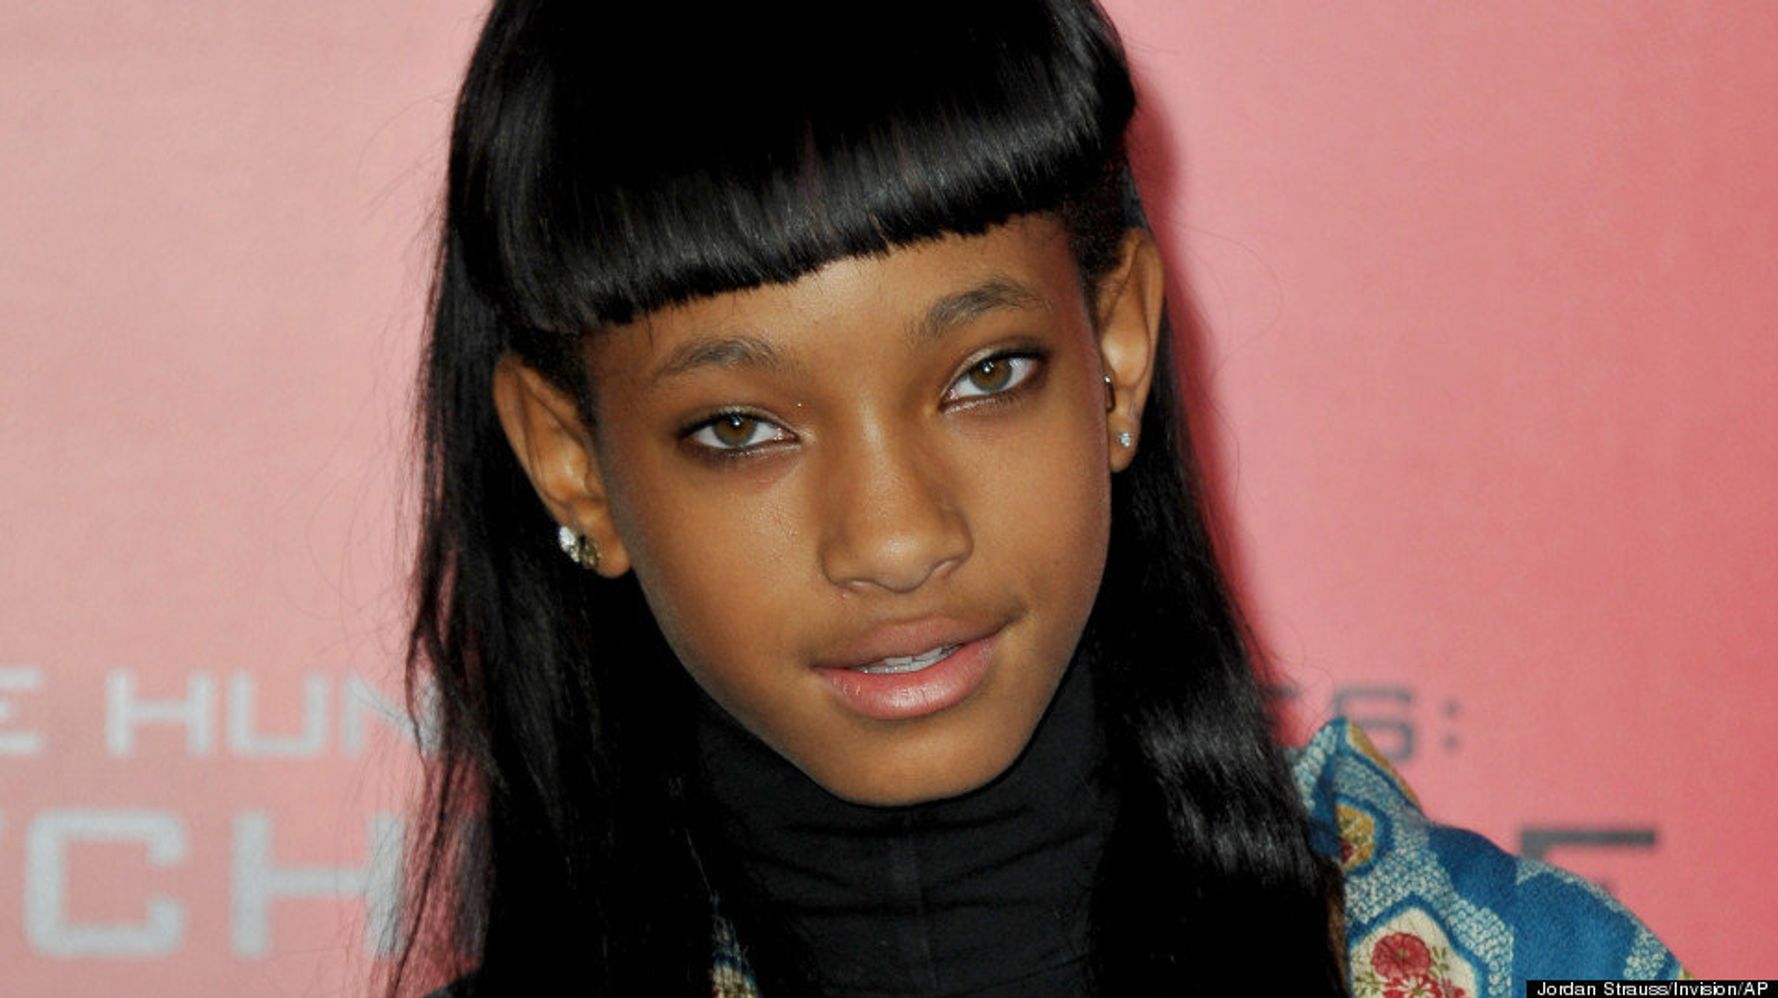 Willow Smith Photo Sparks Controversy Huffpost 